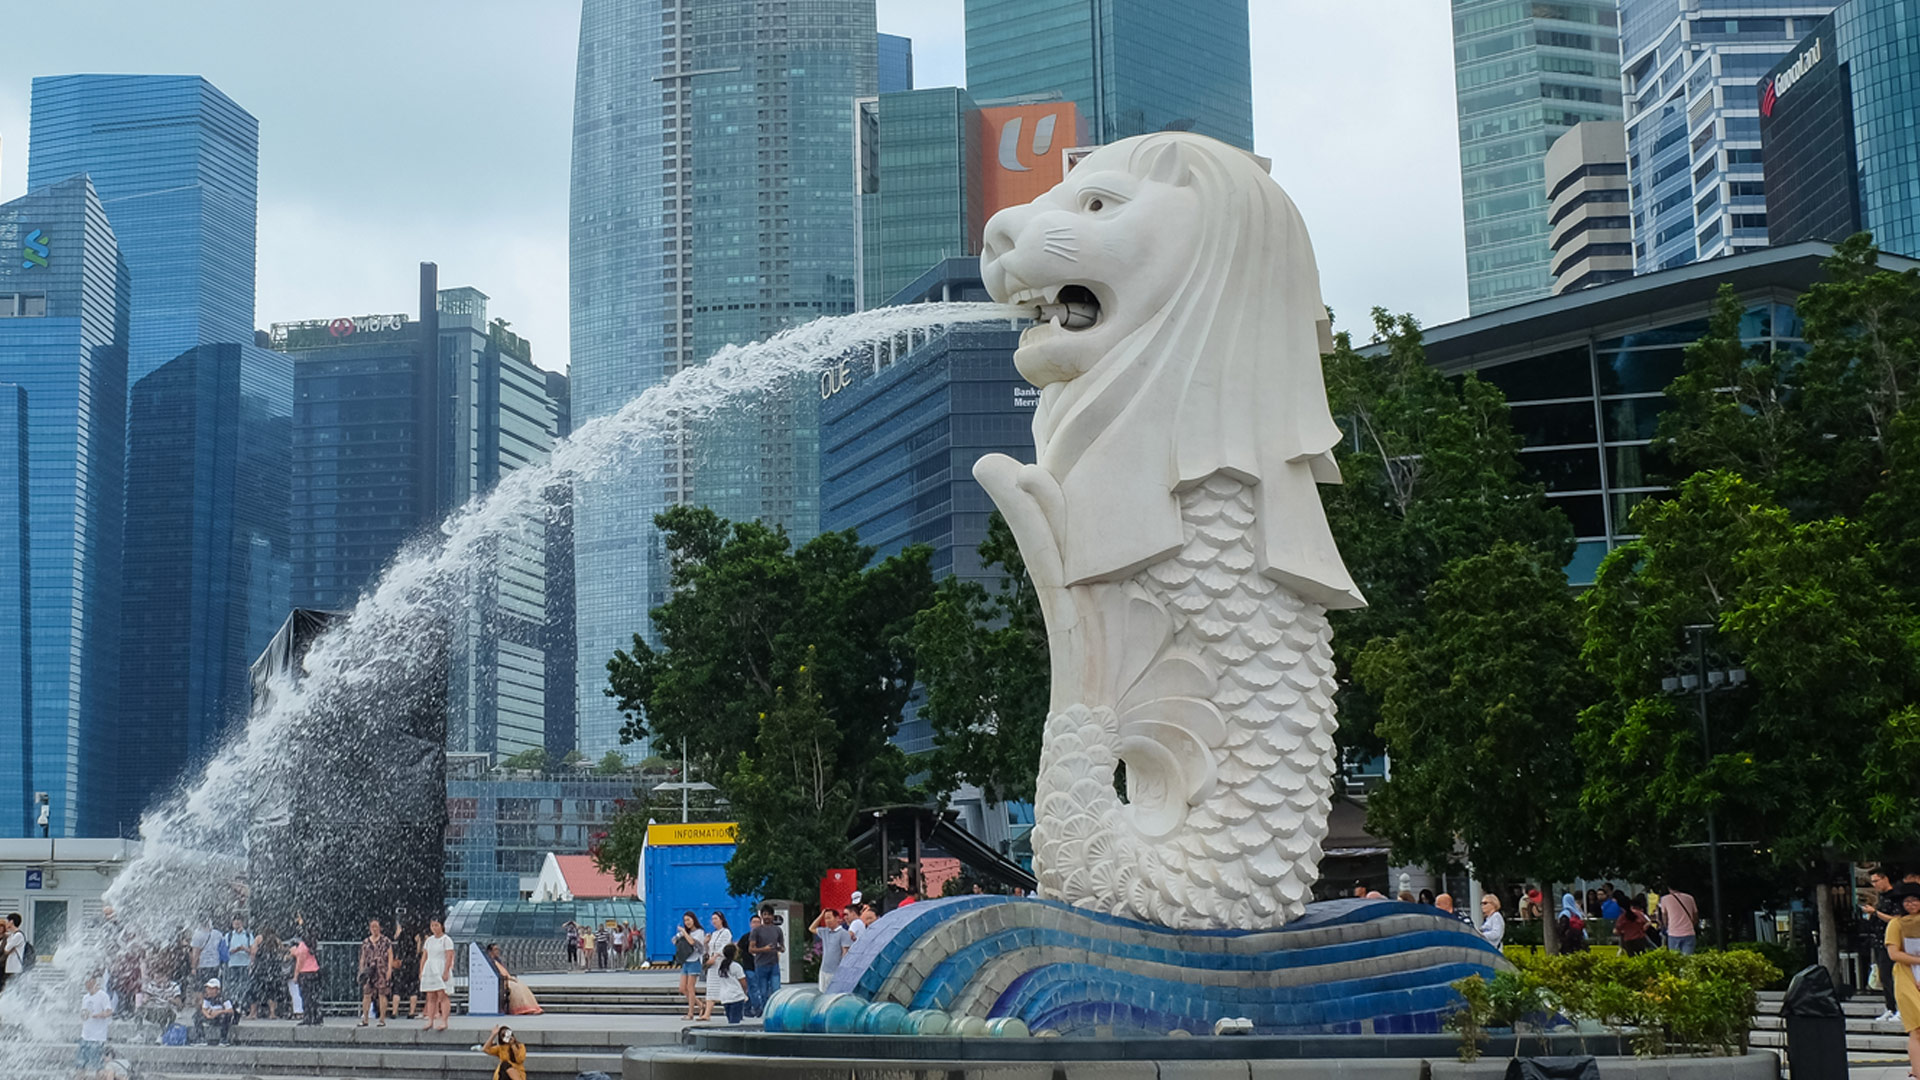 An image of the Merlion in Singapore